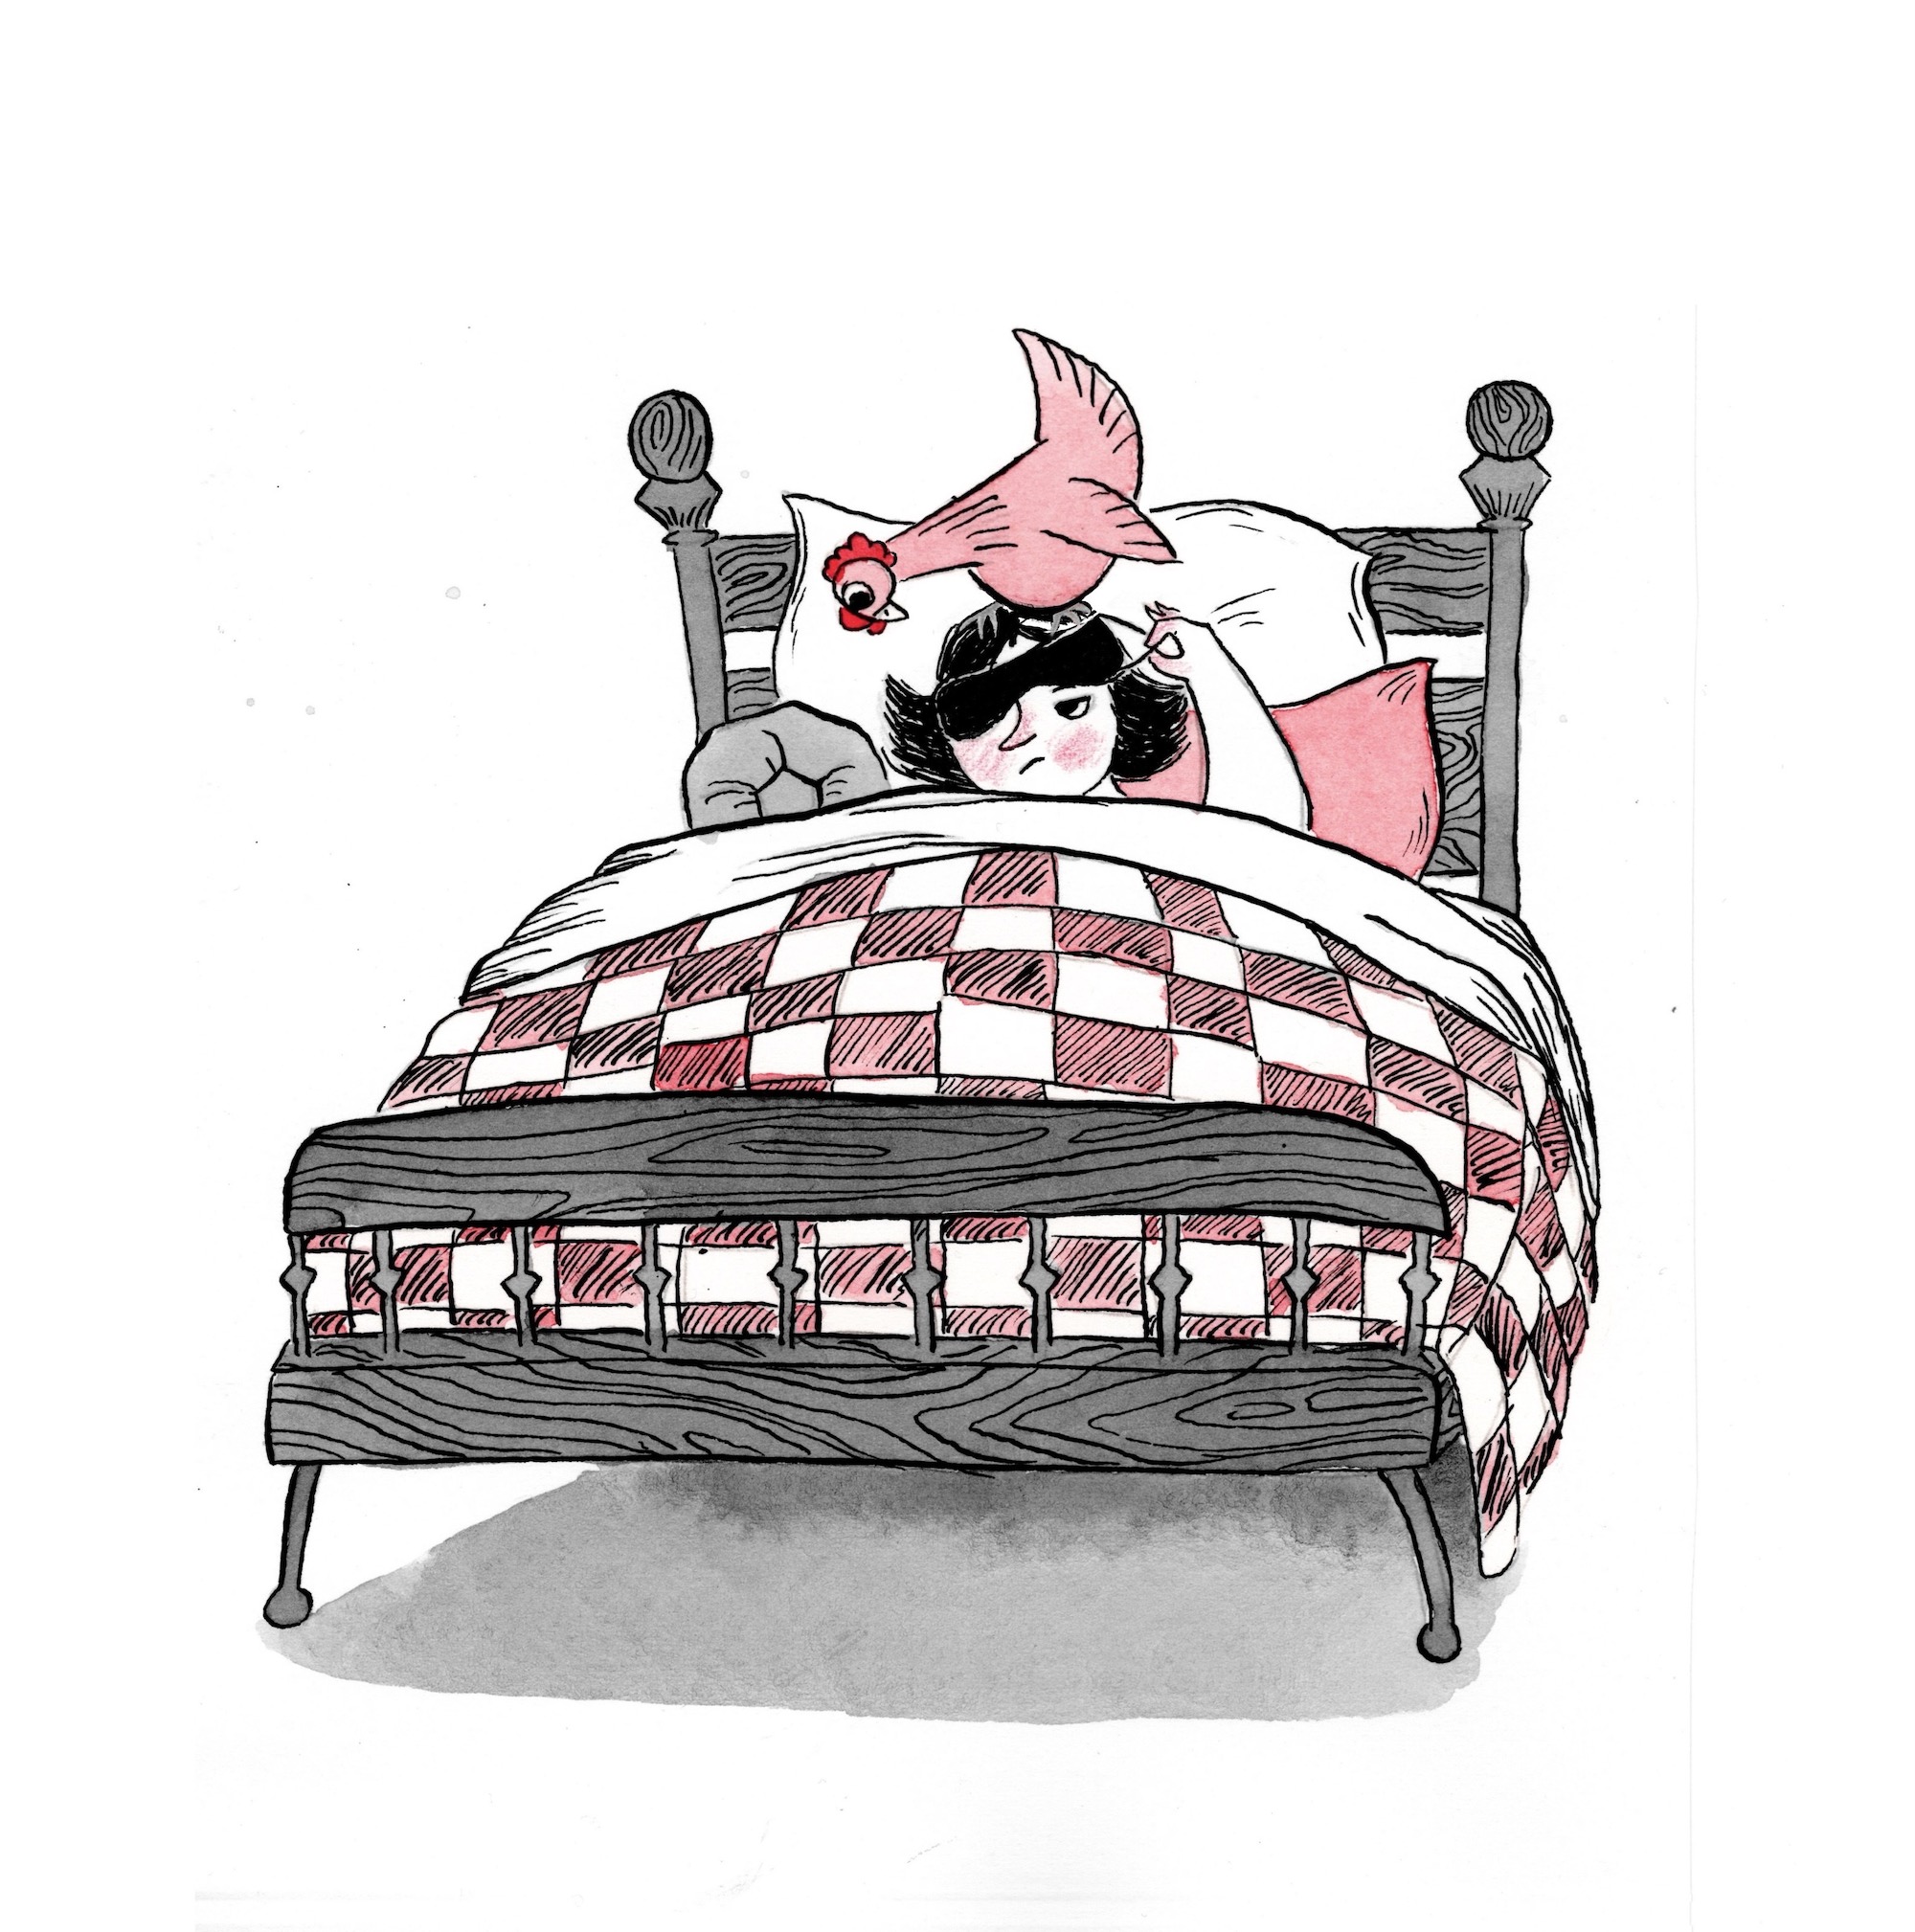 Black, white, and pink ink illustration of a woman in bed, with a chicken perched on her head. The woman is lifting one corner of her sleep mask and looking annoyed.